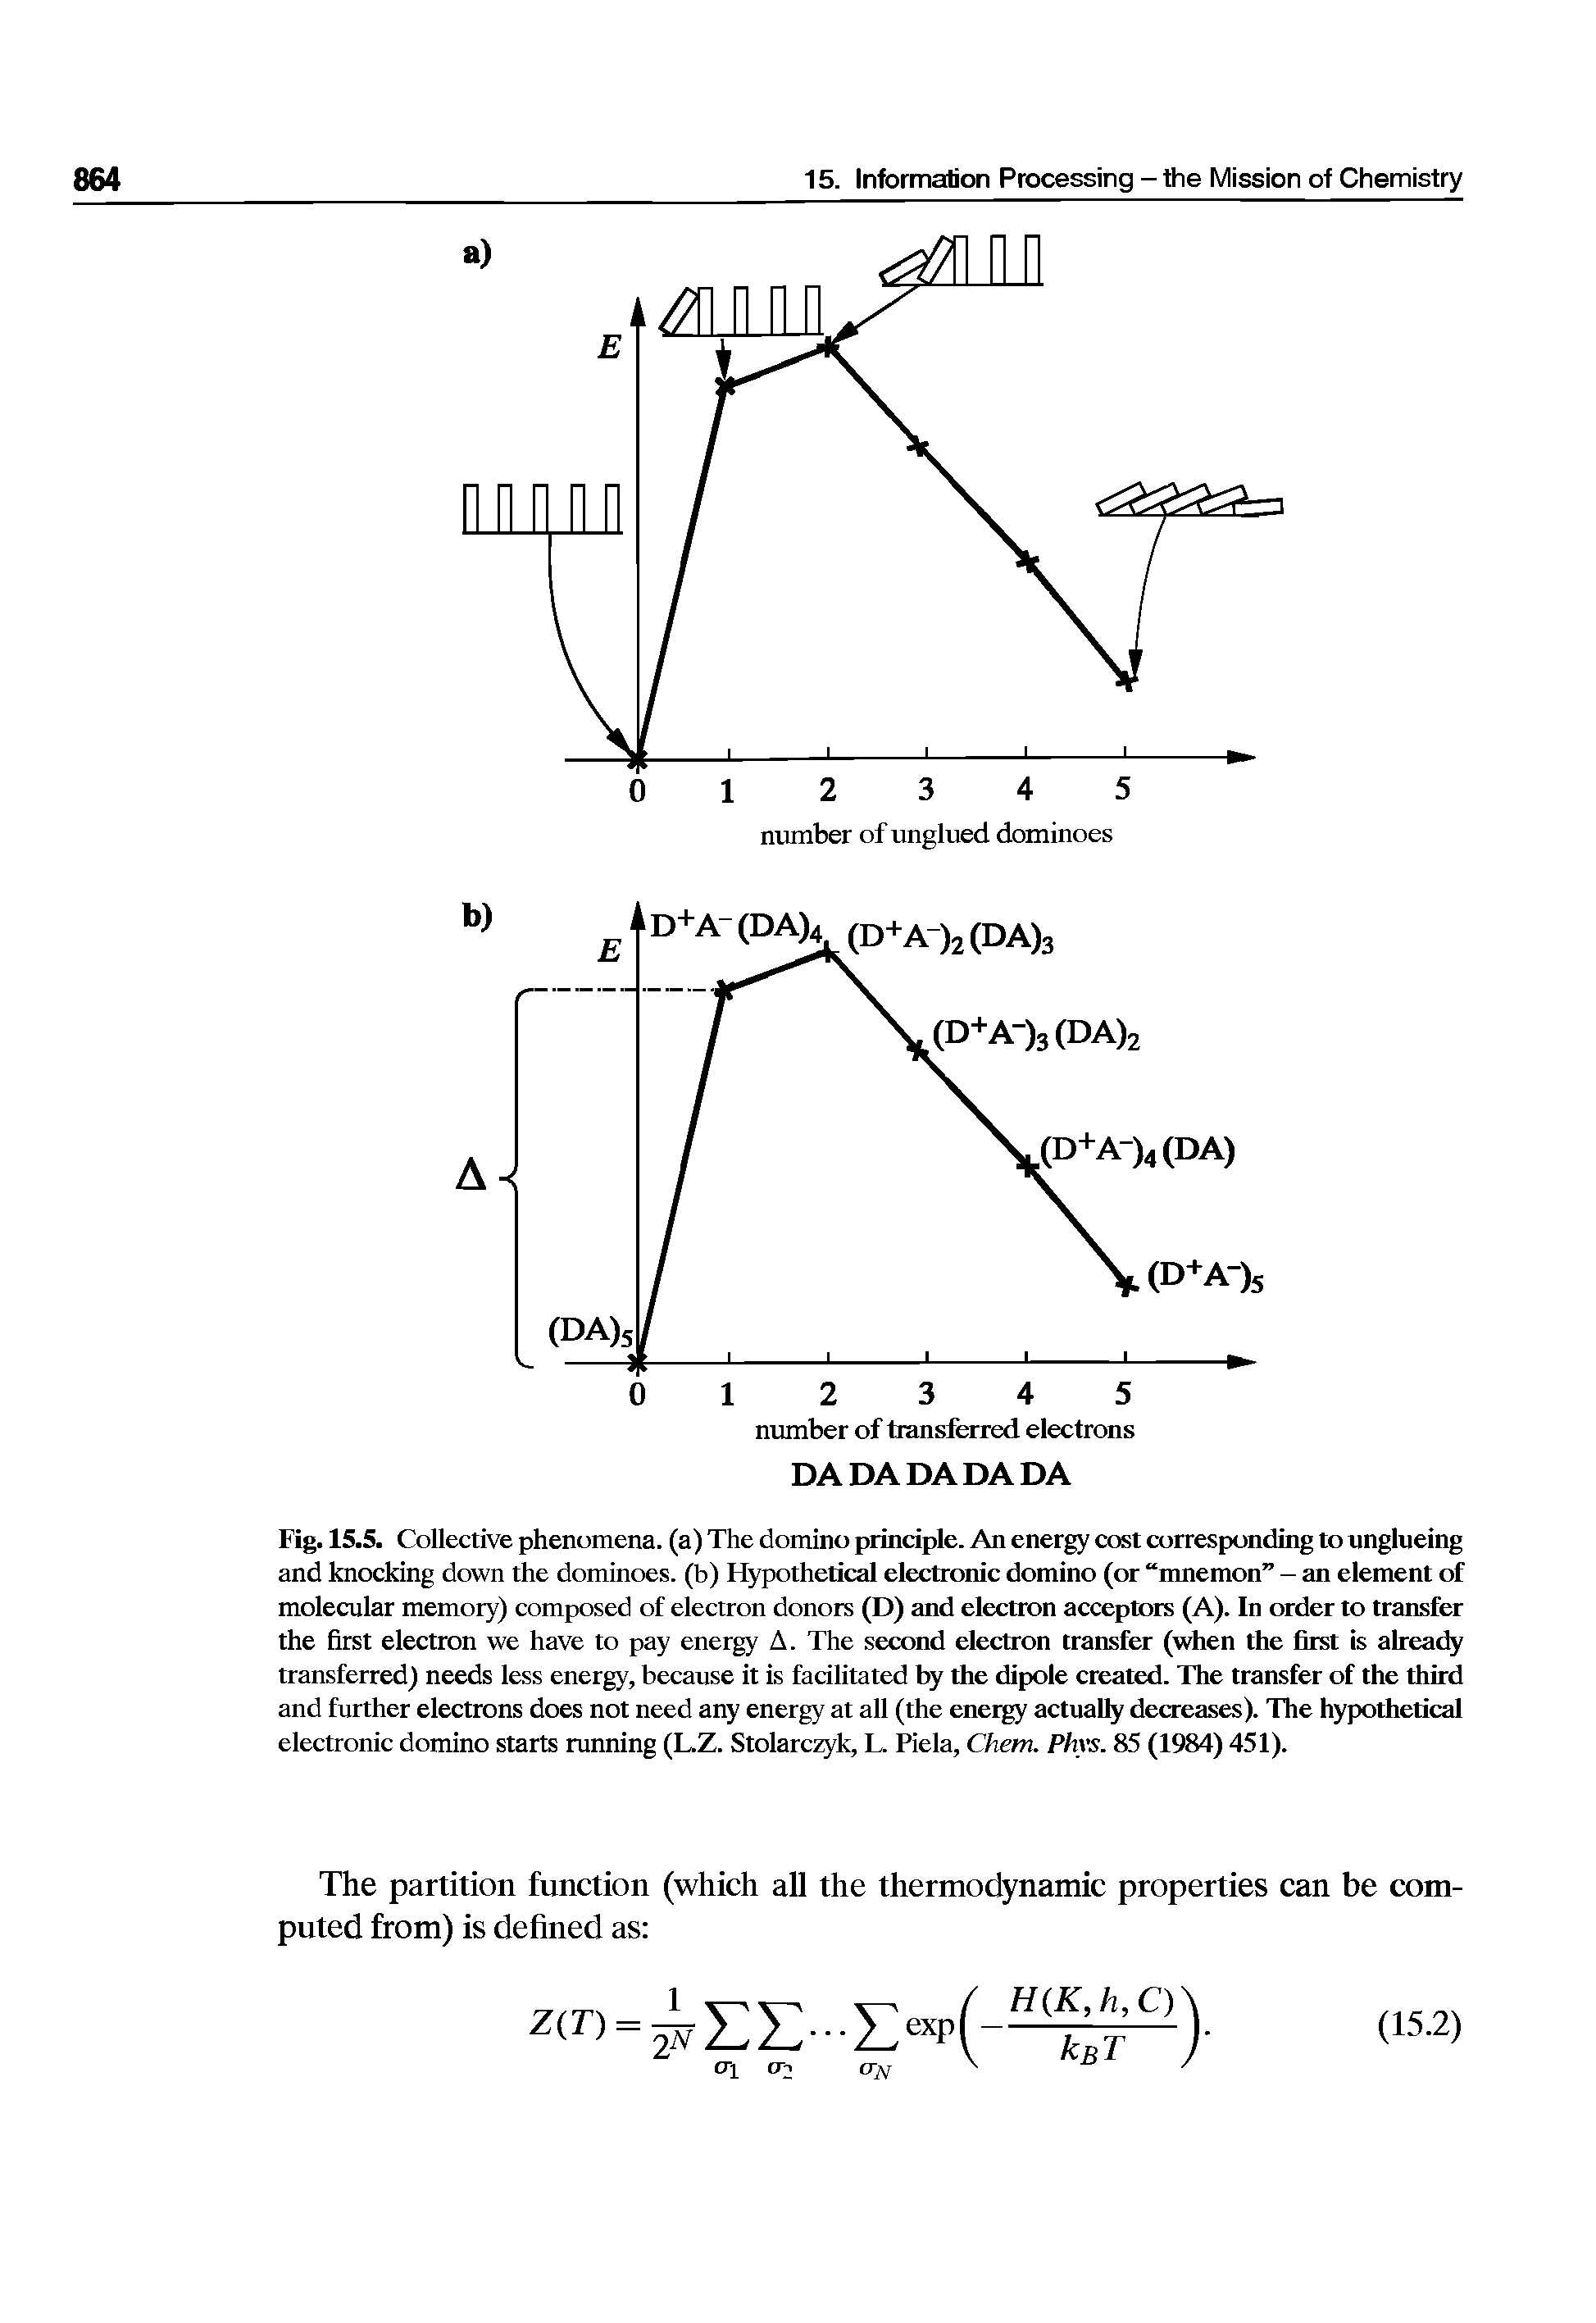 Fig. 15.5. Collective phenomena, (a) The domino principle. An energy cost corresponding to unglueing and knocking down the dominoes, (b) Hypothetical electronic domino (or nmemon - an element of molecular memory) composed of electron donors (D) and electron acceptors (A). In order to transfer the first electron we have to pay energy A. The second electron transfer (when the first is alreatfy transferred) needs less energy, because it is facilitated by the dipole created. The transfer of the third and further electrons does not need any energy at all (the energy actual decreases). The hypothetical electronic domino starts running (L.Z. Stolarc k, L. Piela, Chetn. Phys. 85 (1984) 451).